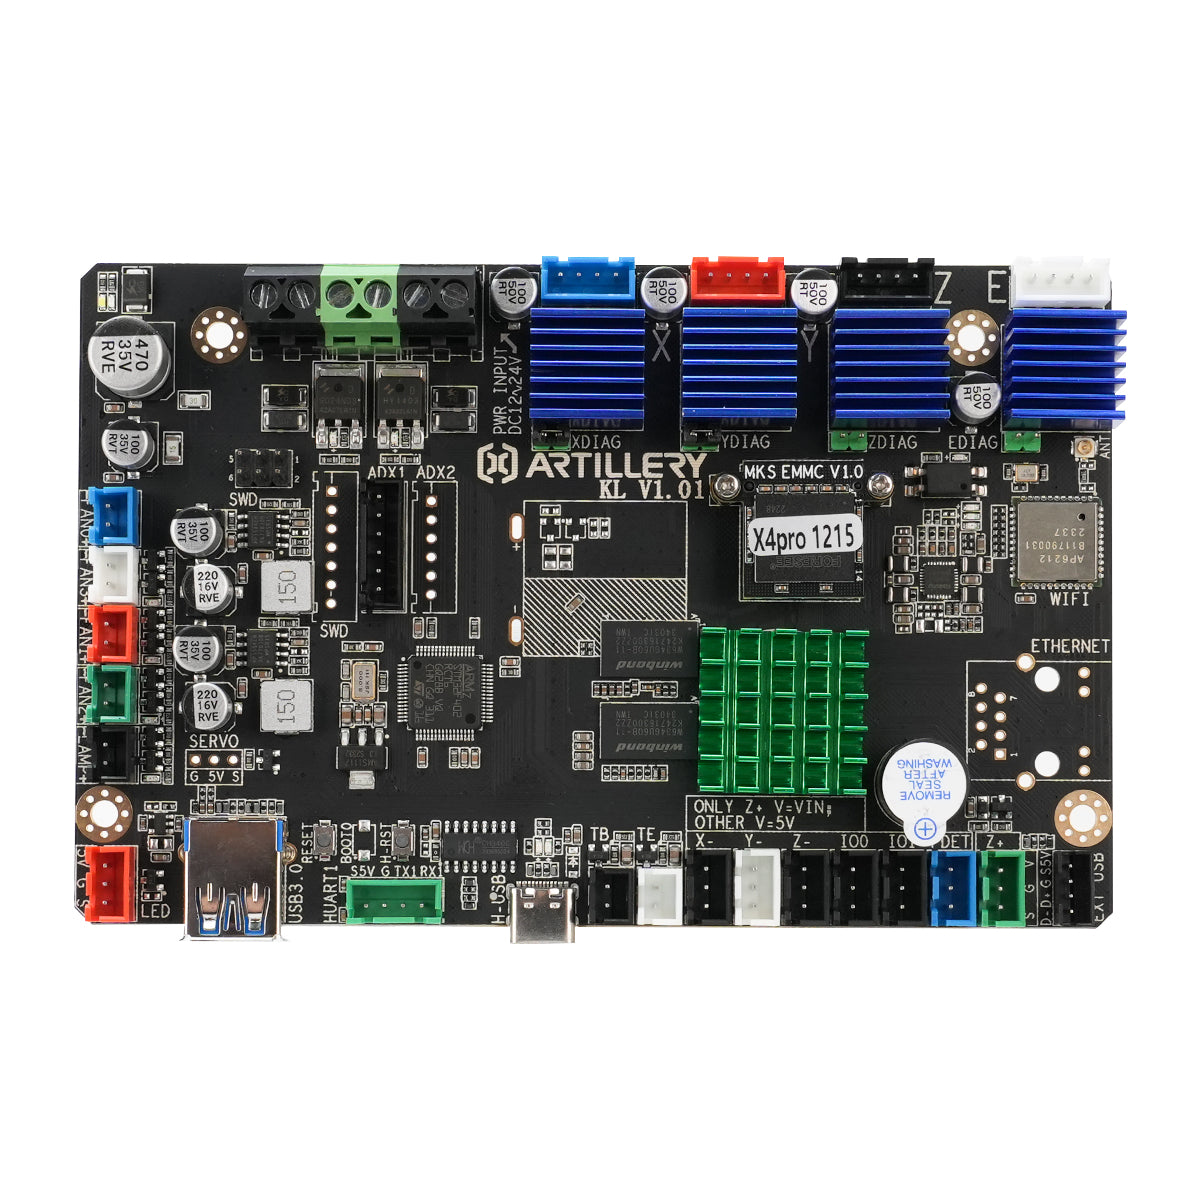 Mainboard For SW-X4 PRO / X4 Plus